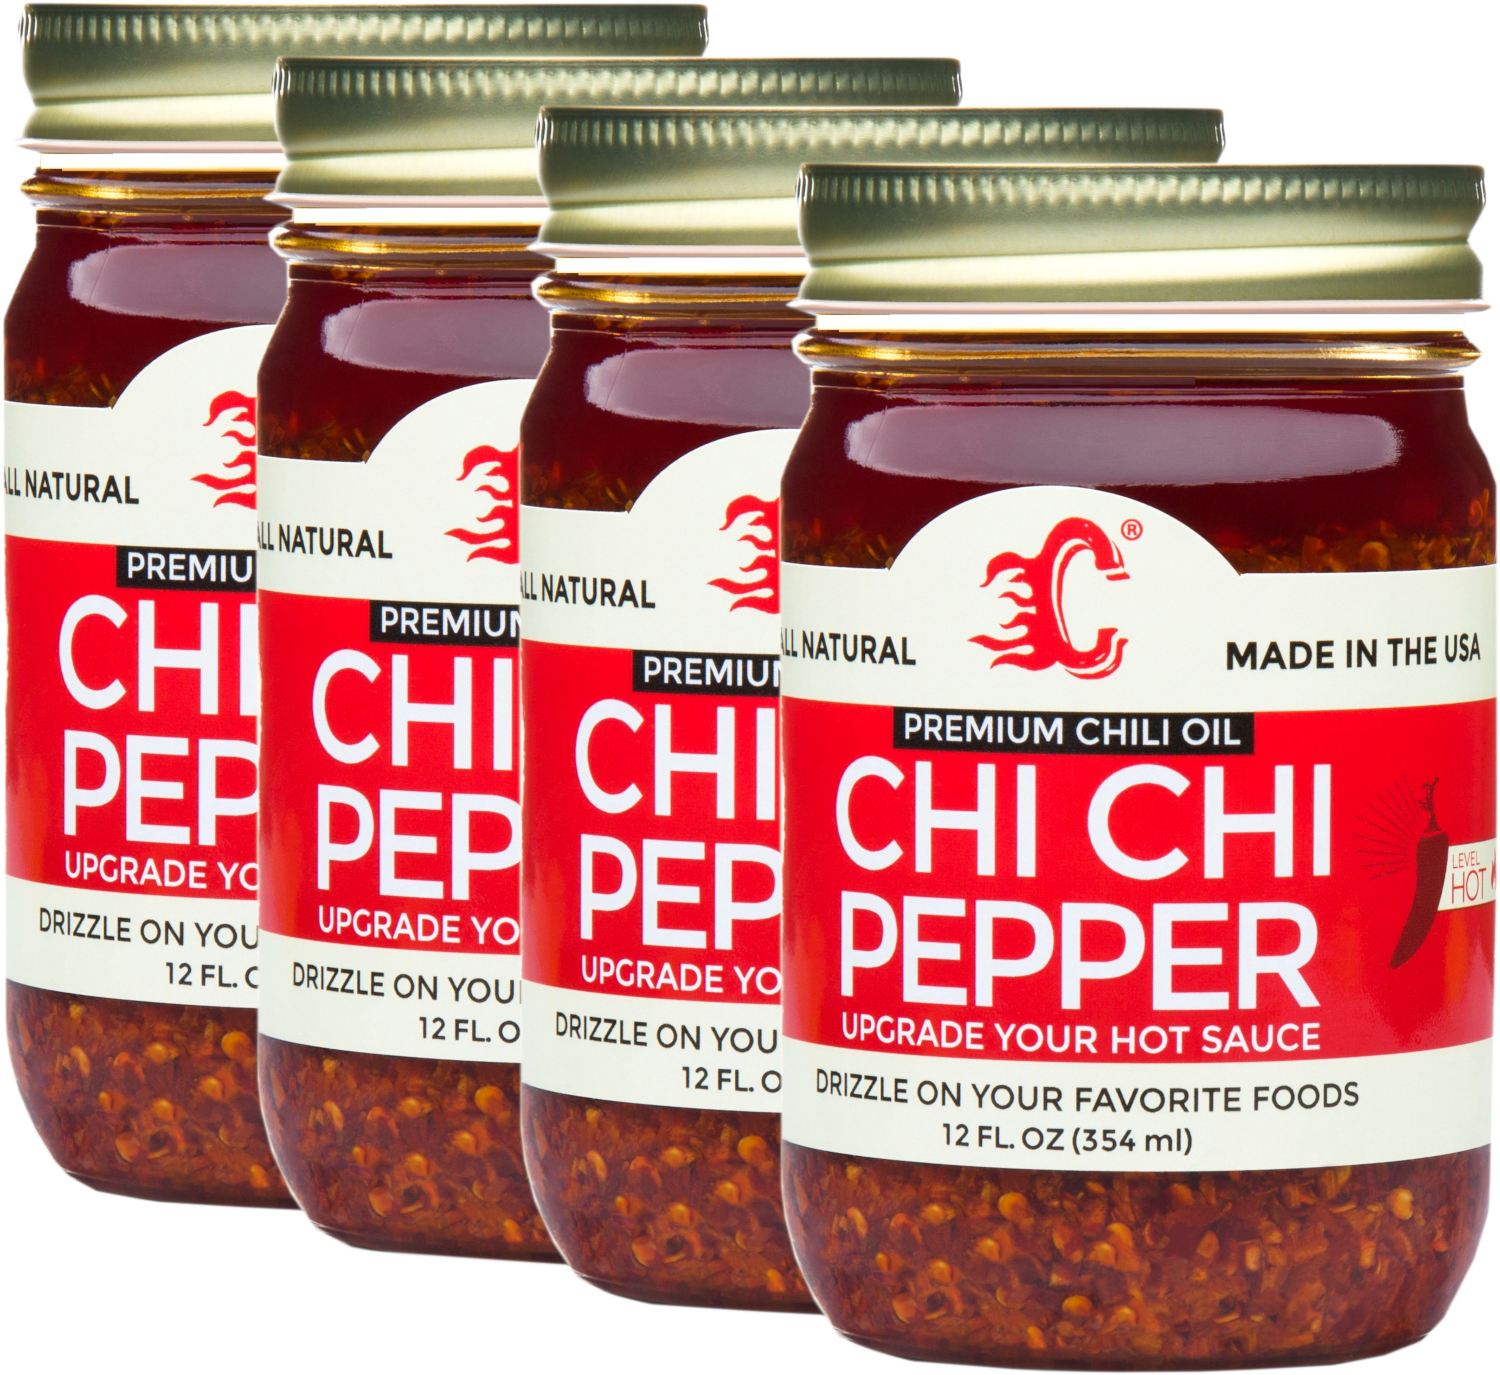 4 Pack (Save 10%) + FREE 3 Day Shipping -Chi Chi Pepper Large 12 OZ Jars (Spicy)